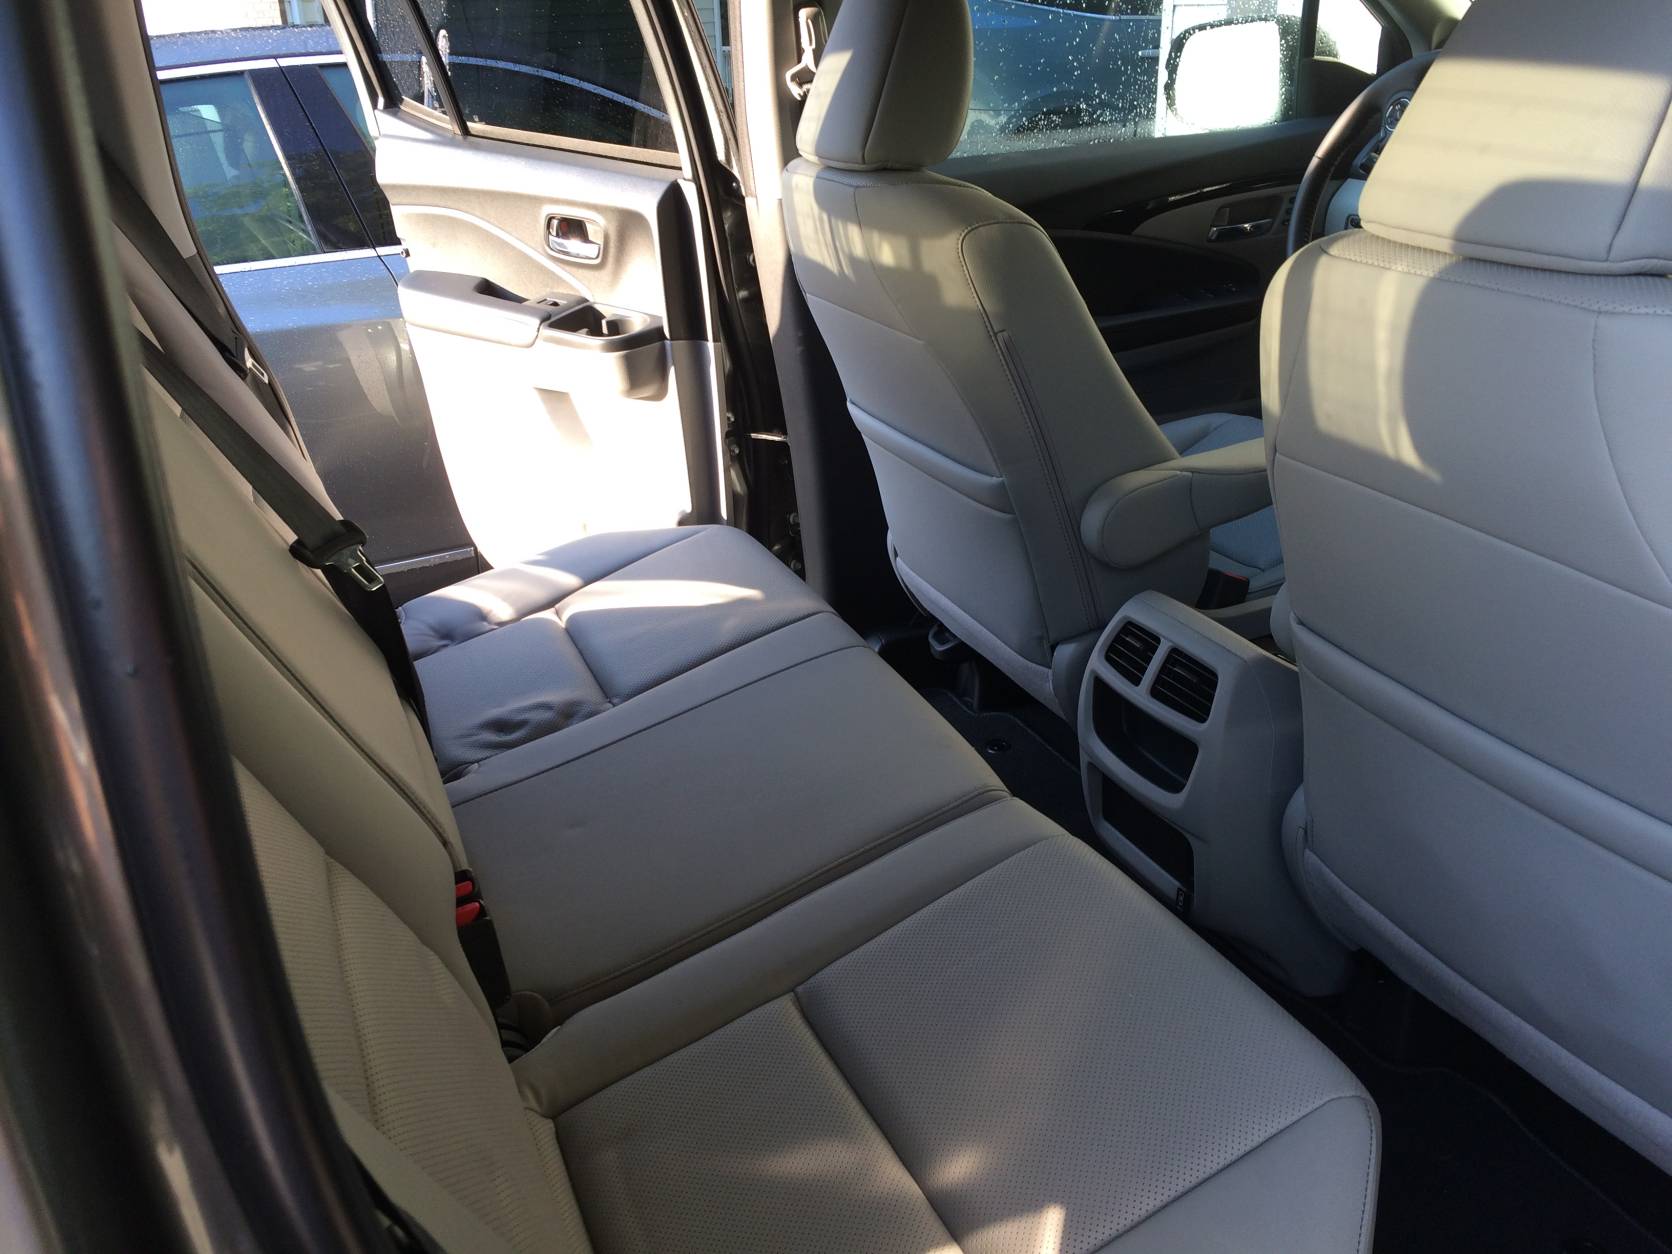 The seats of the 2017 Honda Ridgeline AWD are comfortable with leather-heated seats and the rear bench is good for three, with nice head room and adequate leg room for most passengers. (WTOP/Mike Parris)